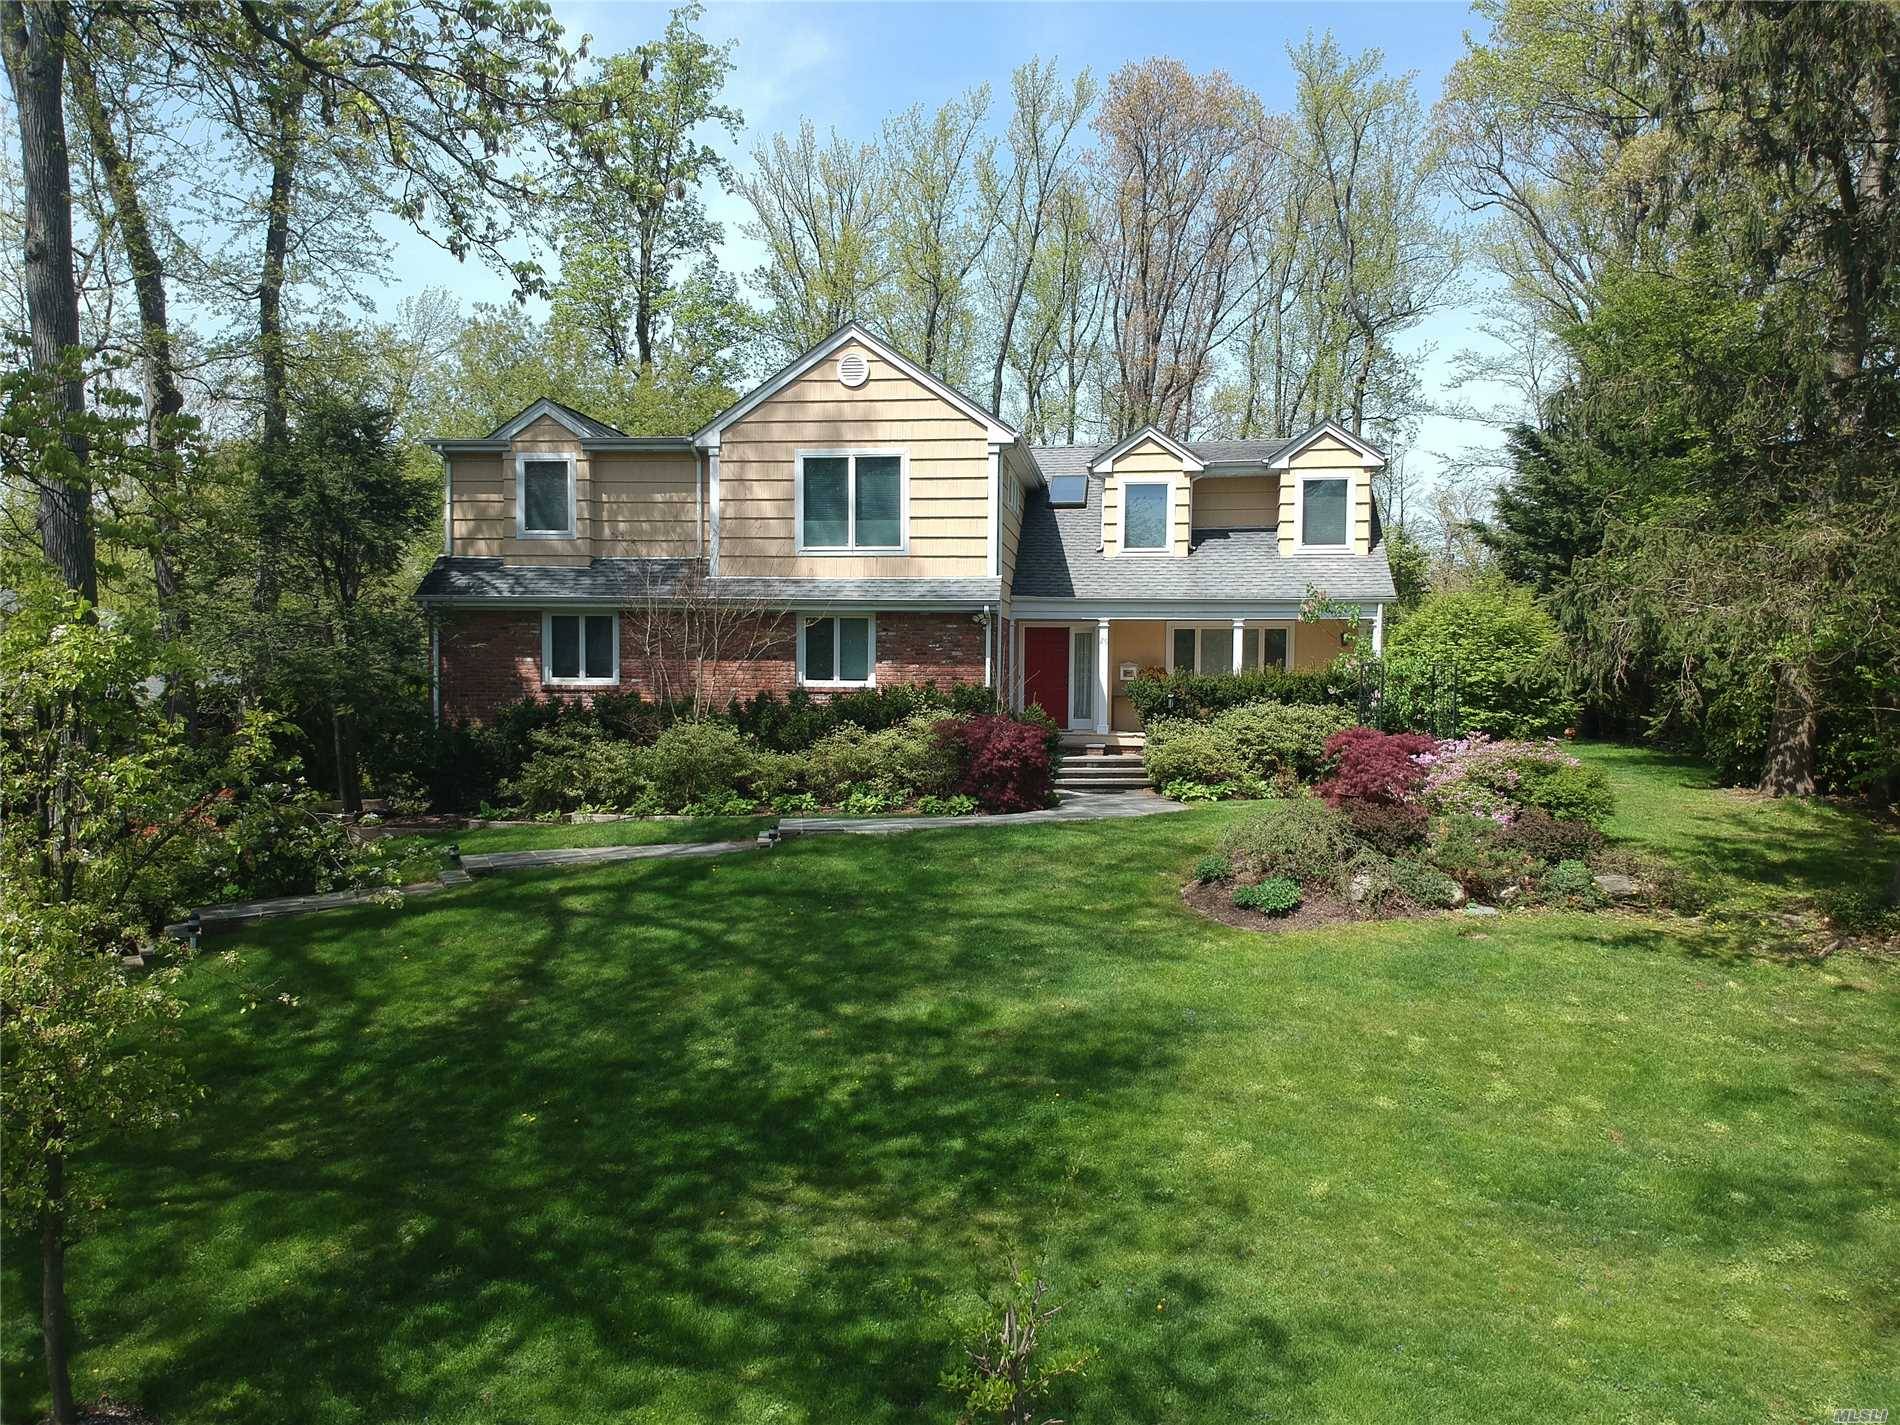 Updated 5 Bedroom, 4. 5 Bath Meticulously Maintained Home.